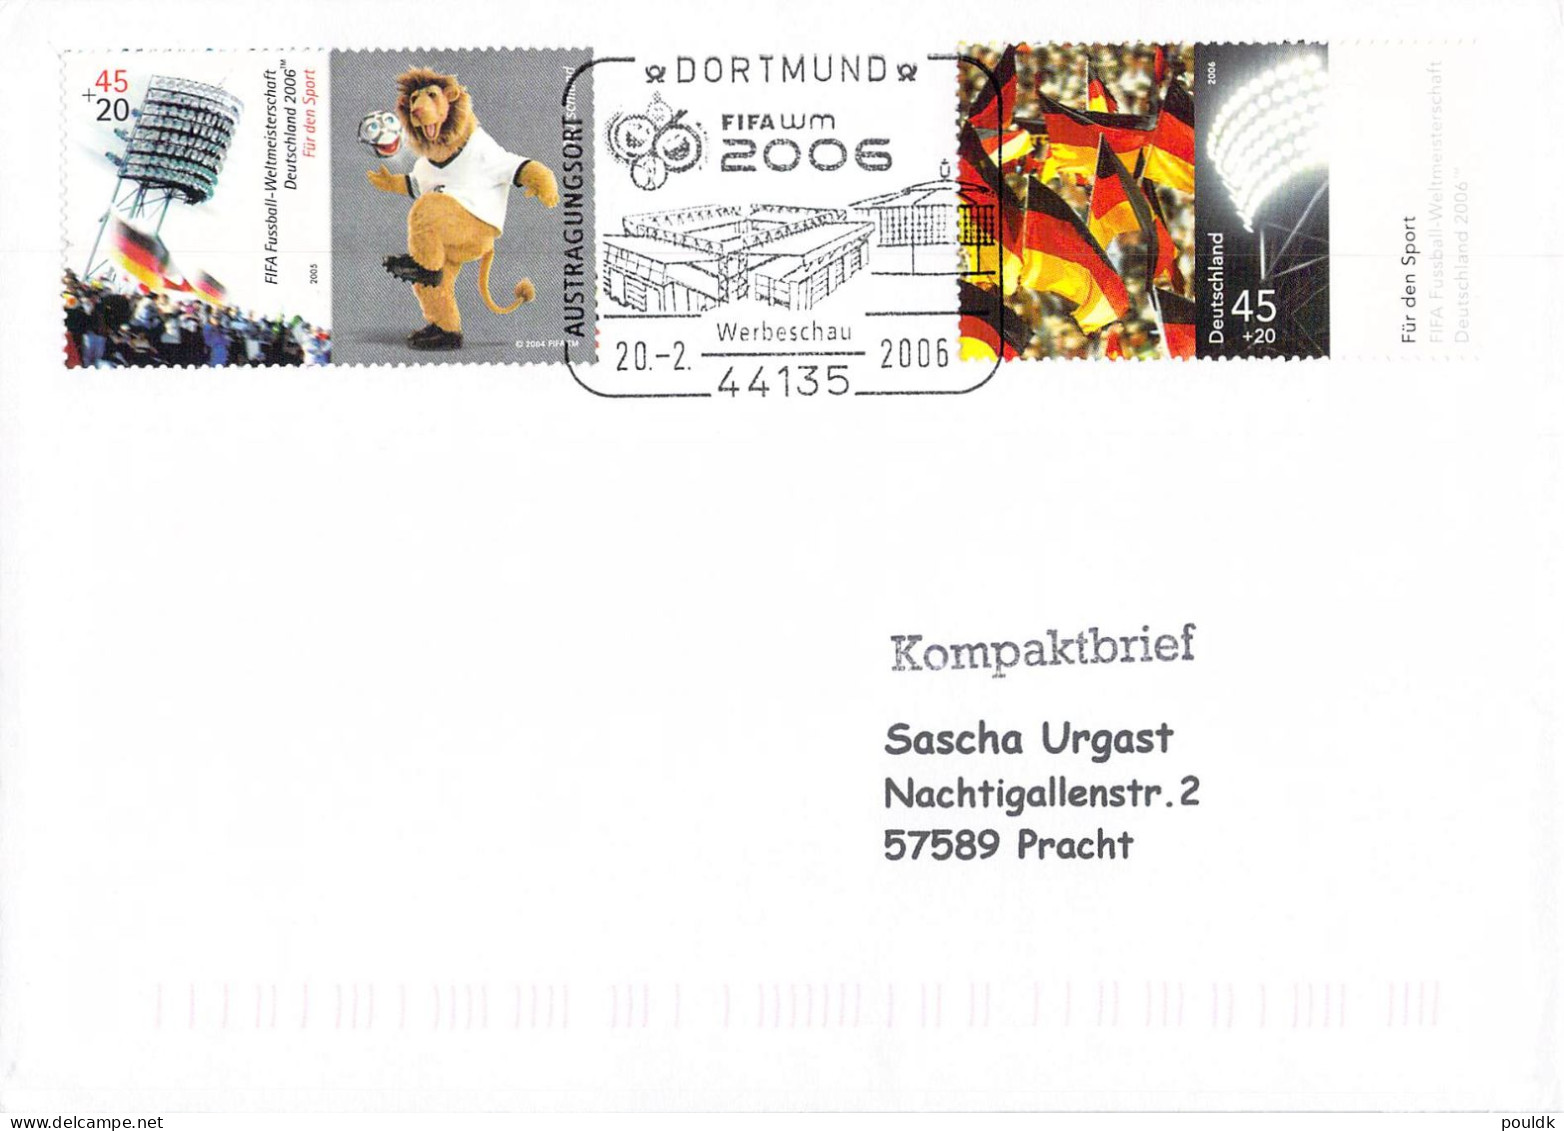 FIFA World Cup in Football in Germany 2006 - 11 covers. Postal weight approx 0,09 kg. Please read Sales Conditions under